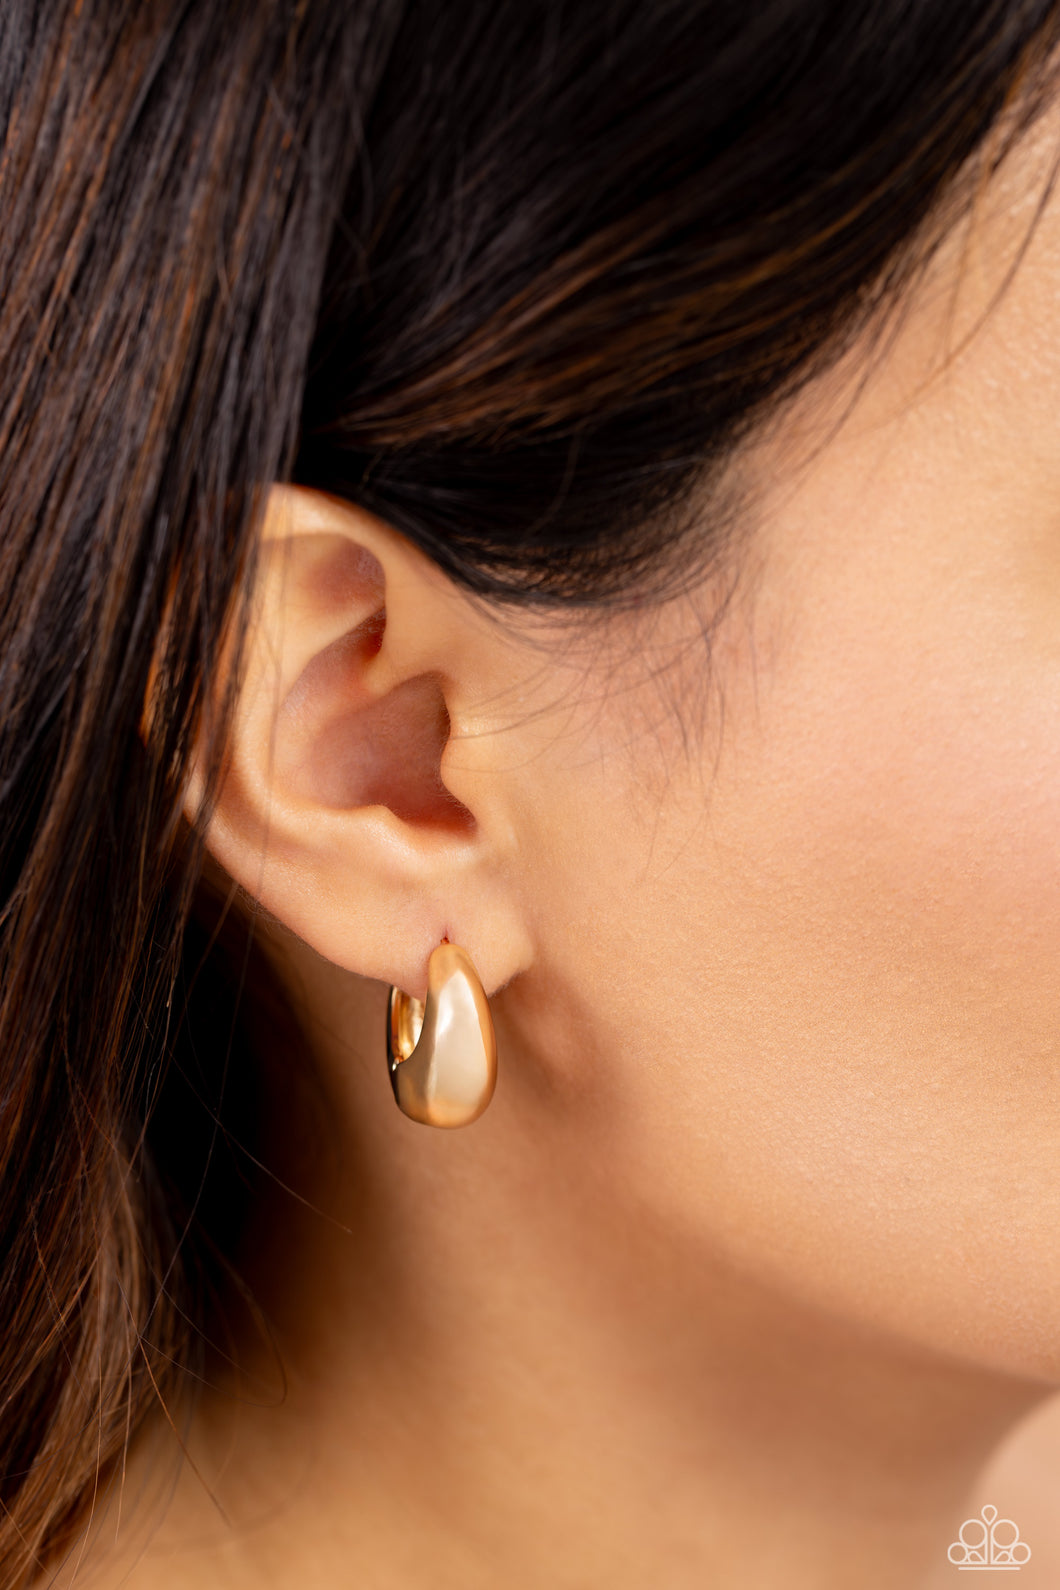 Featuring a beveled surface, a thick gold hoop snugly curls around the ear for a dainty, sleek basic look. Earring attaches to a standard hinge closure fitting. Hoop measures approximately 3/4